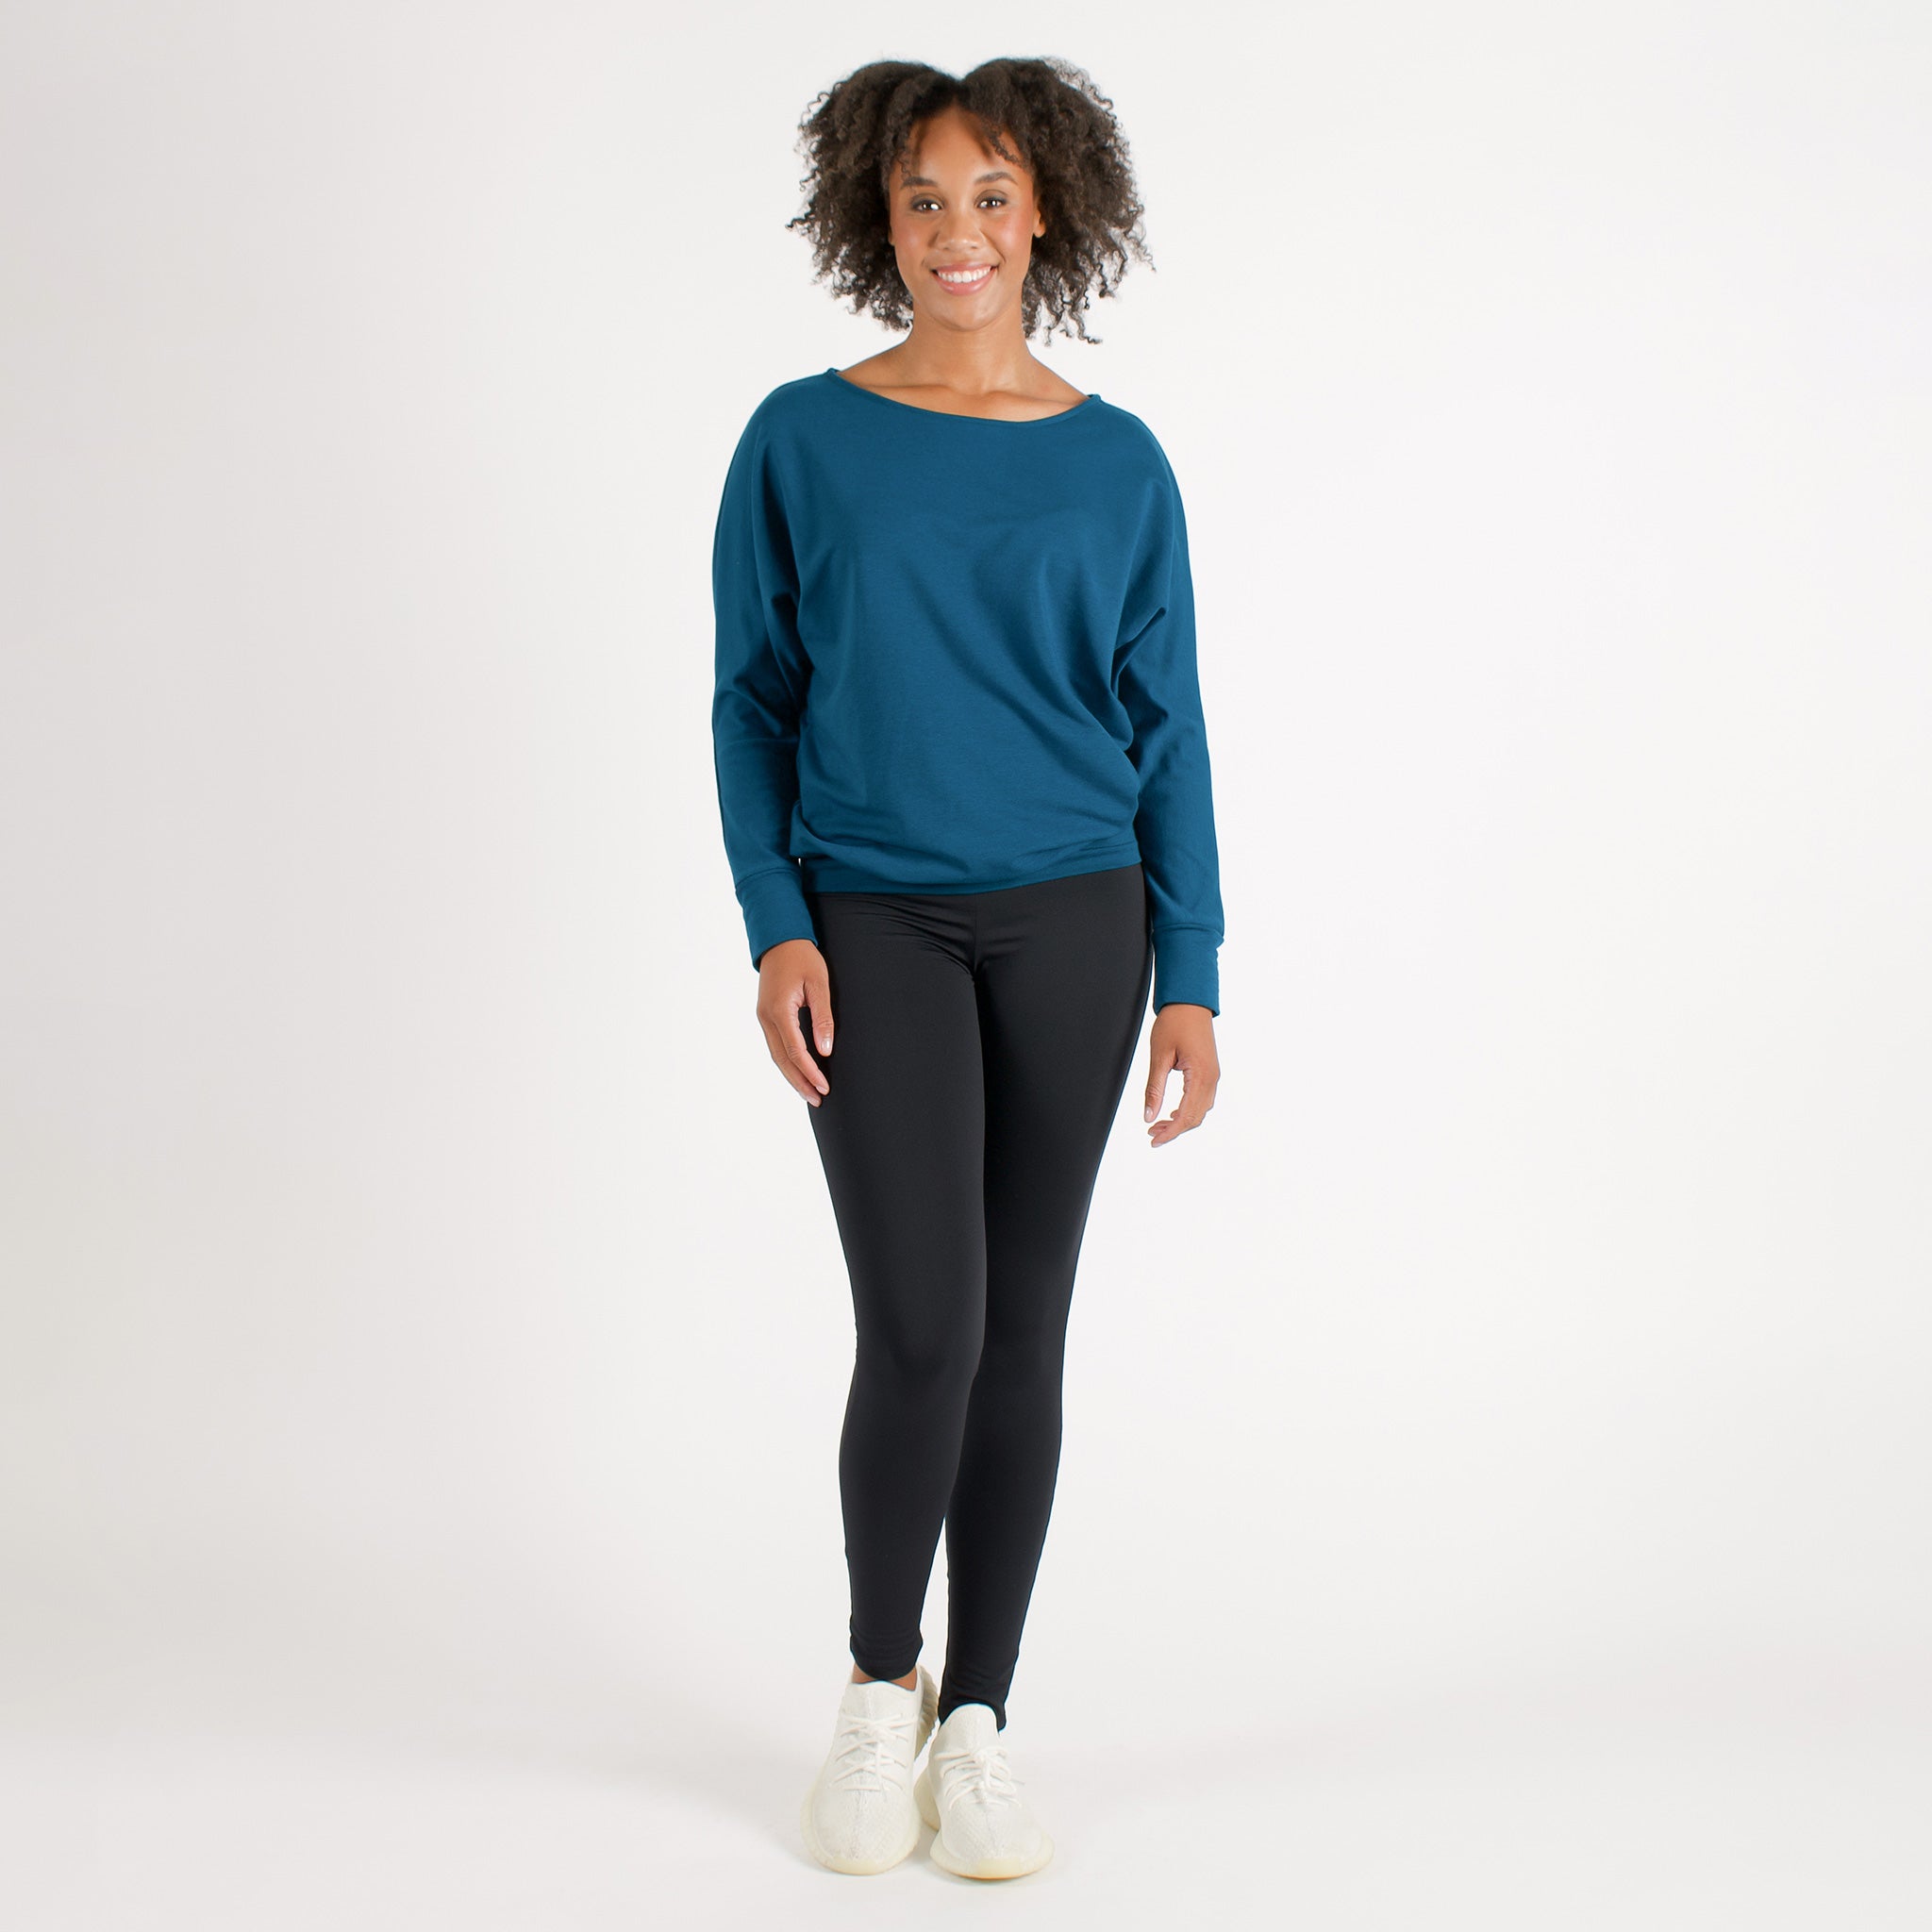 Woman wearing fitted black high-rise waist with ankle length leggings featuring seamless stitching and a hidden back pocket with bright blue sweatshirt